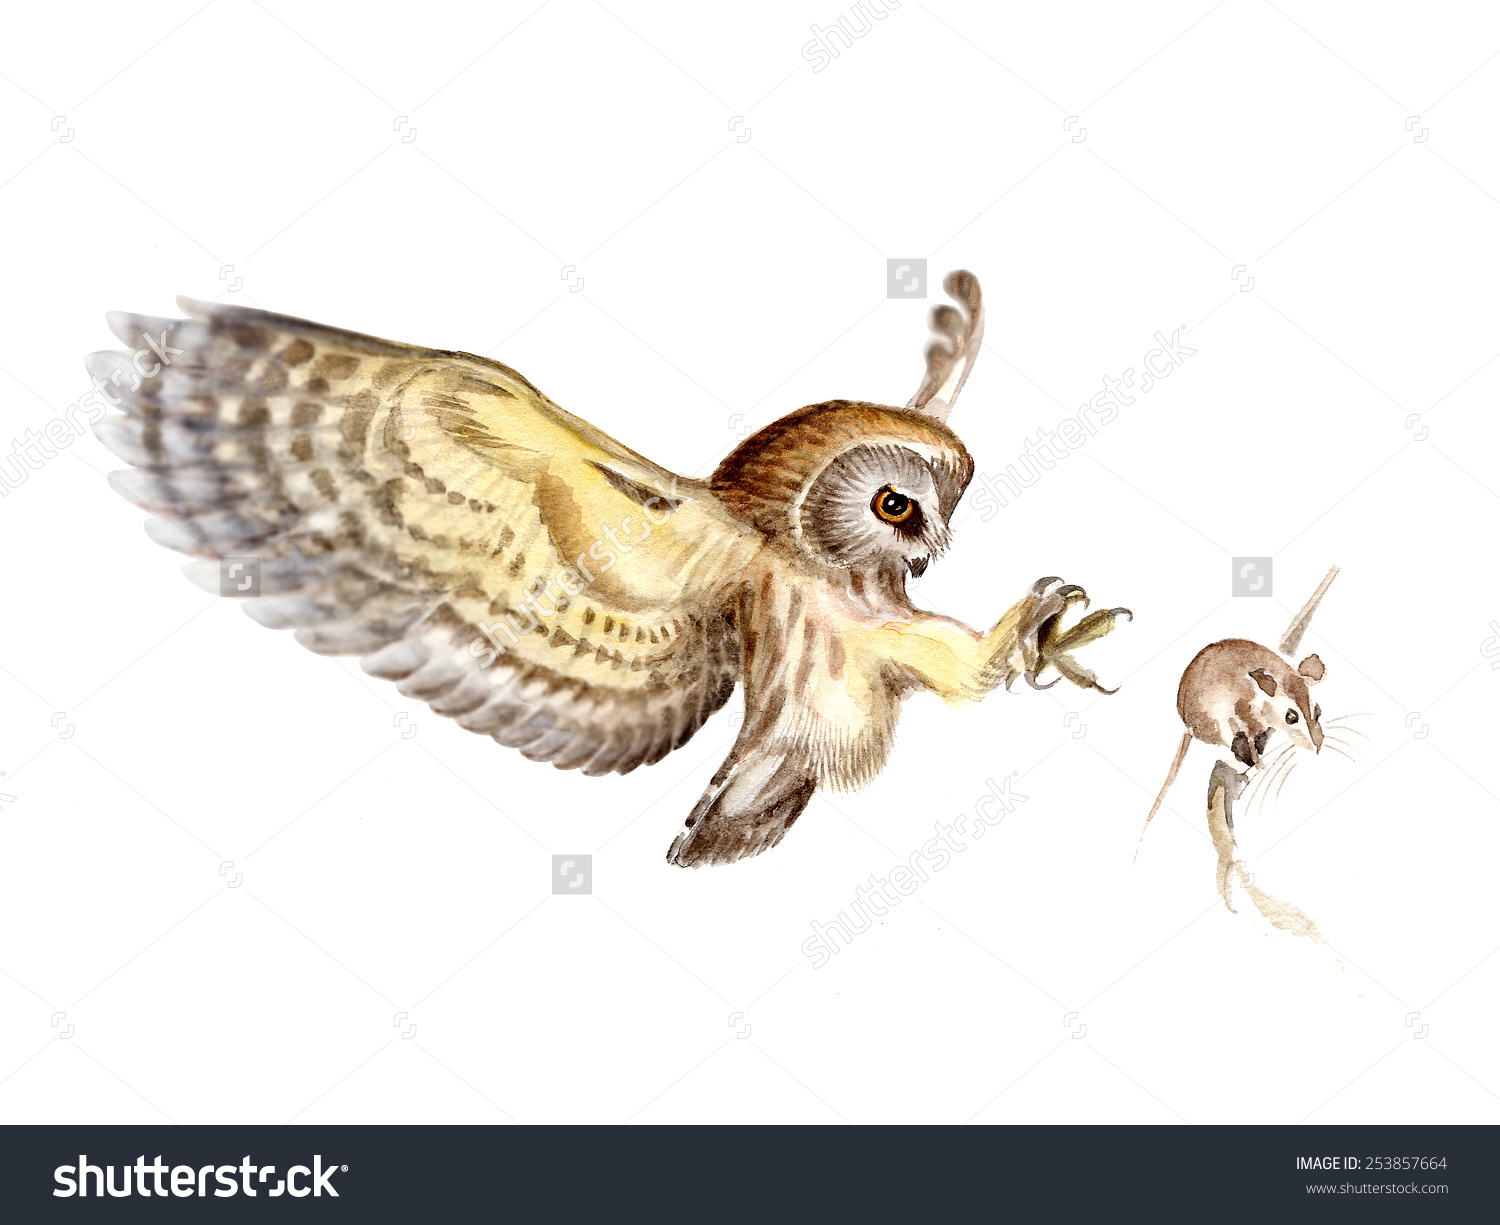 Saw Whet Owl clipart #10, Download drawings